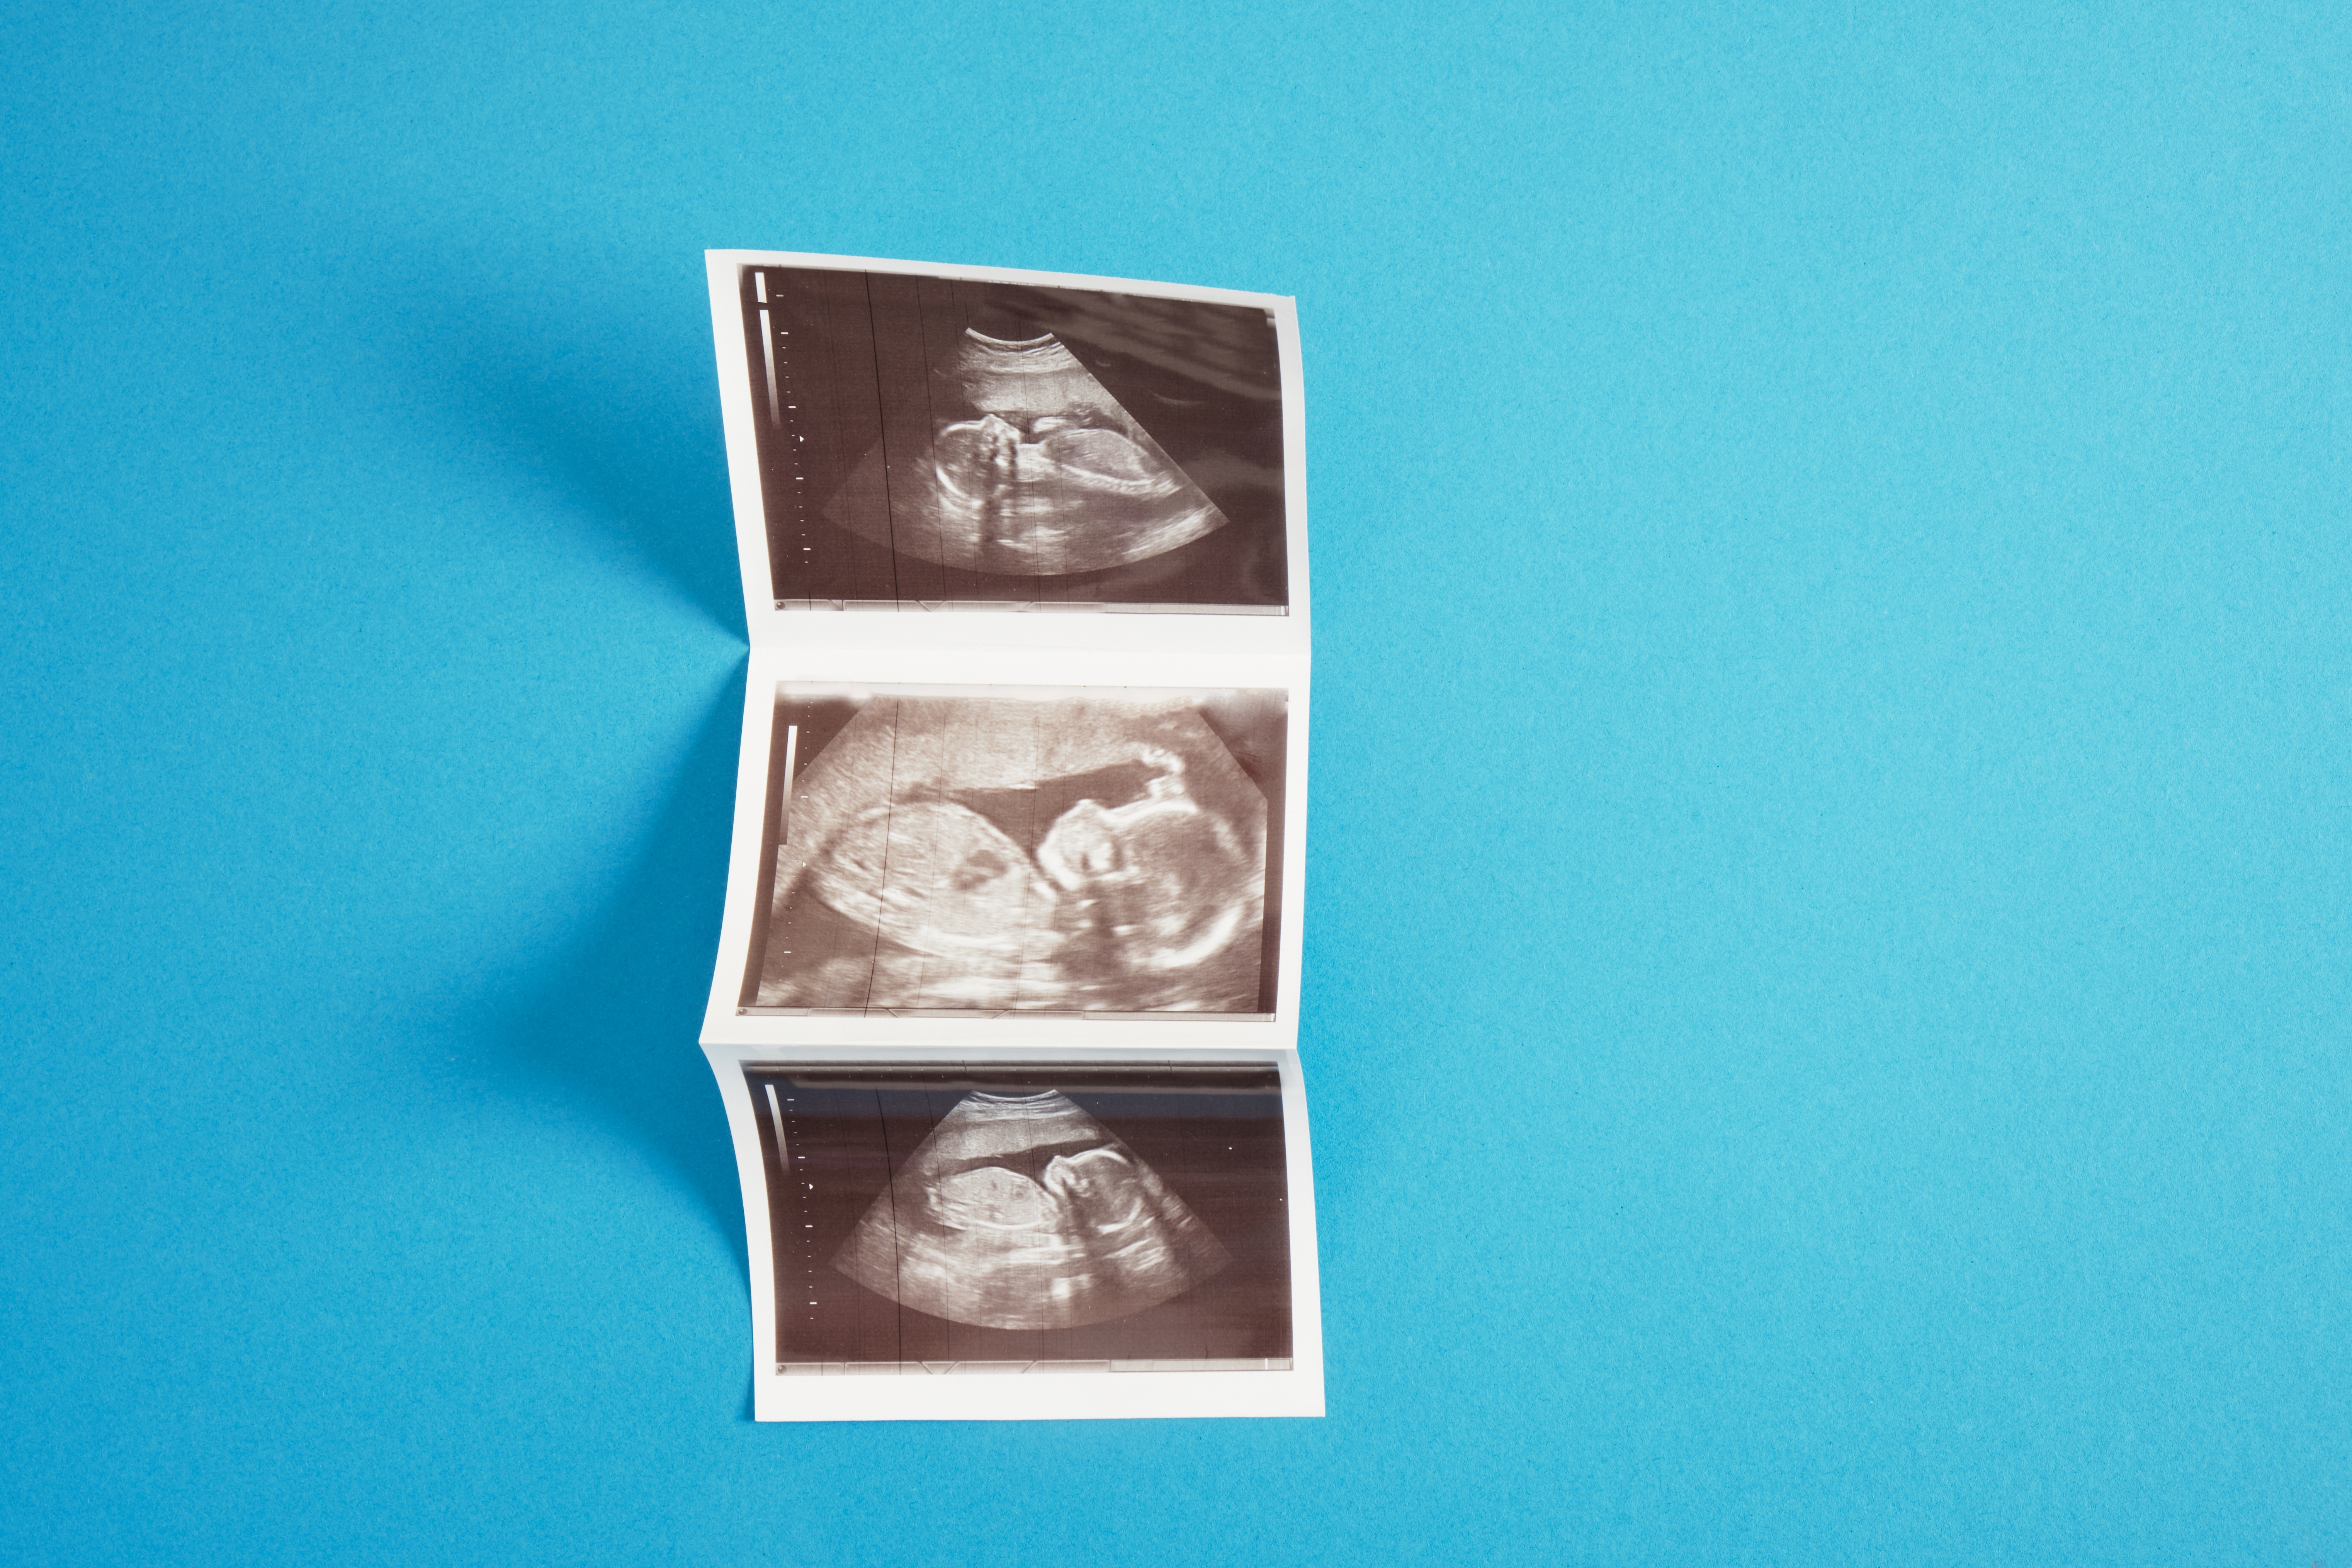 Ultrasound picture | Source: Shutterstock